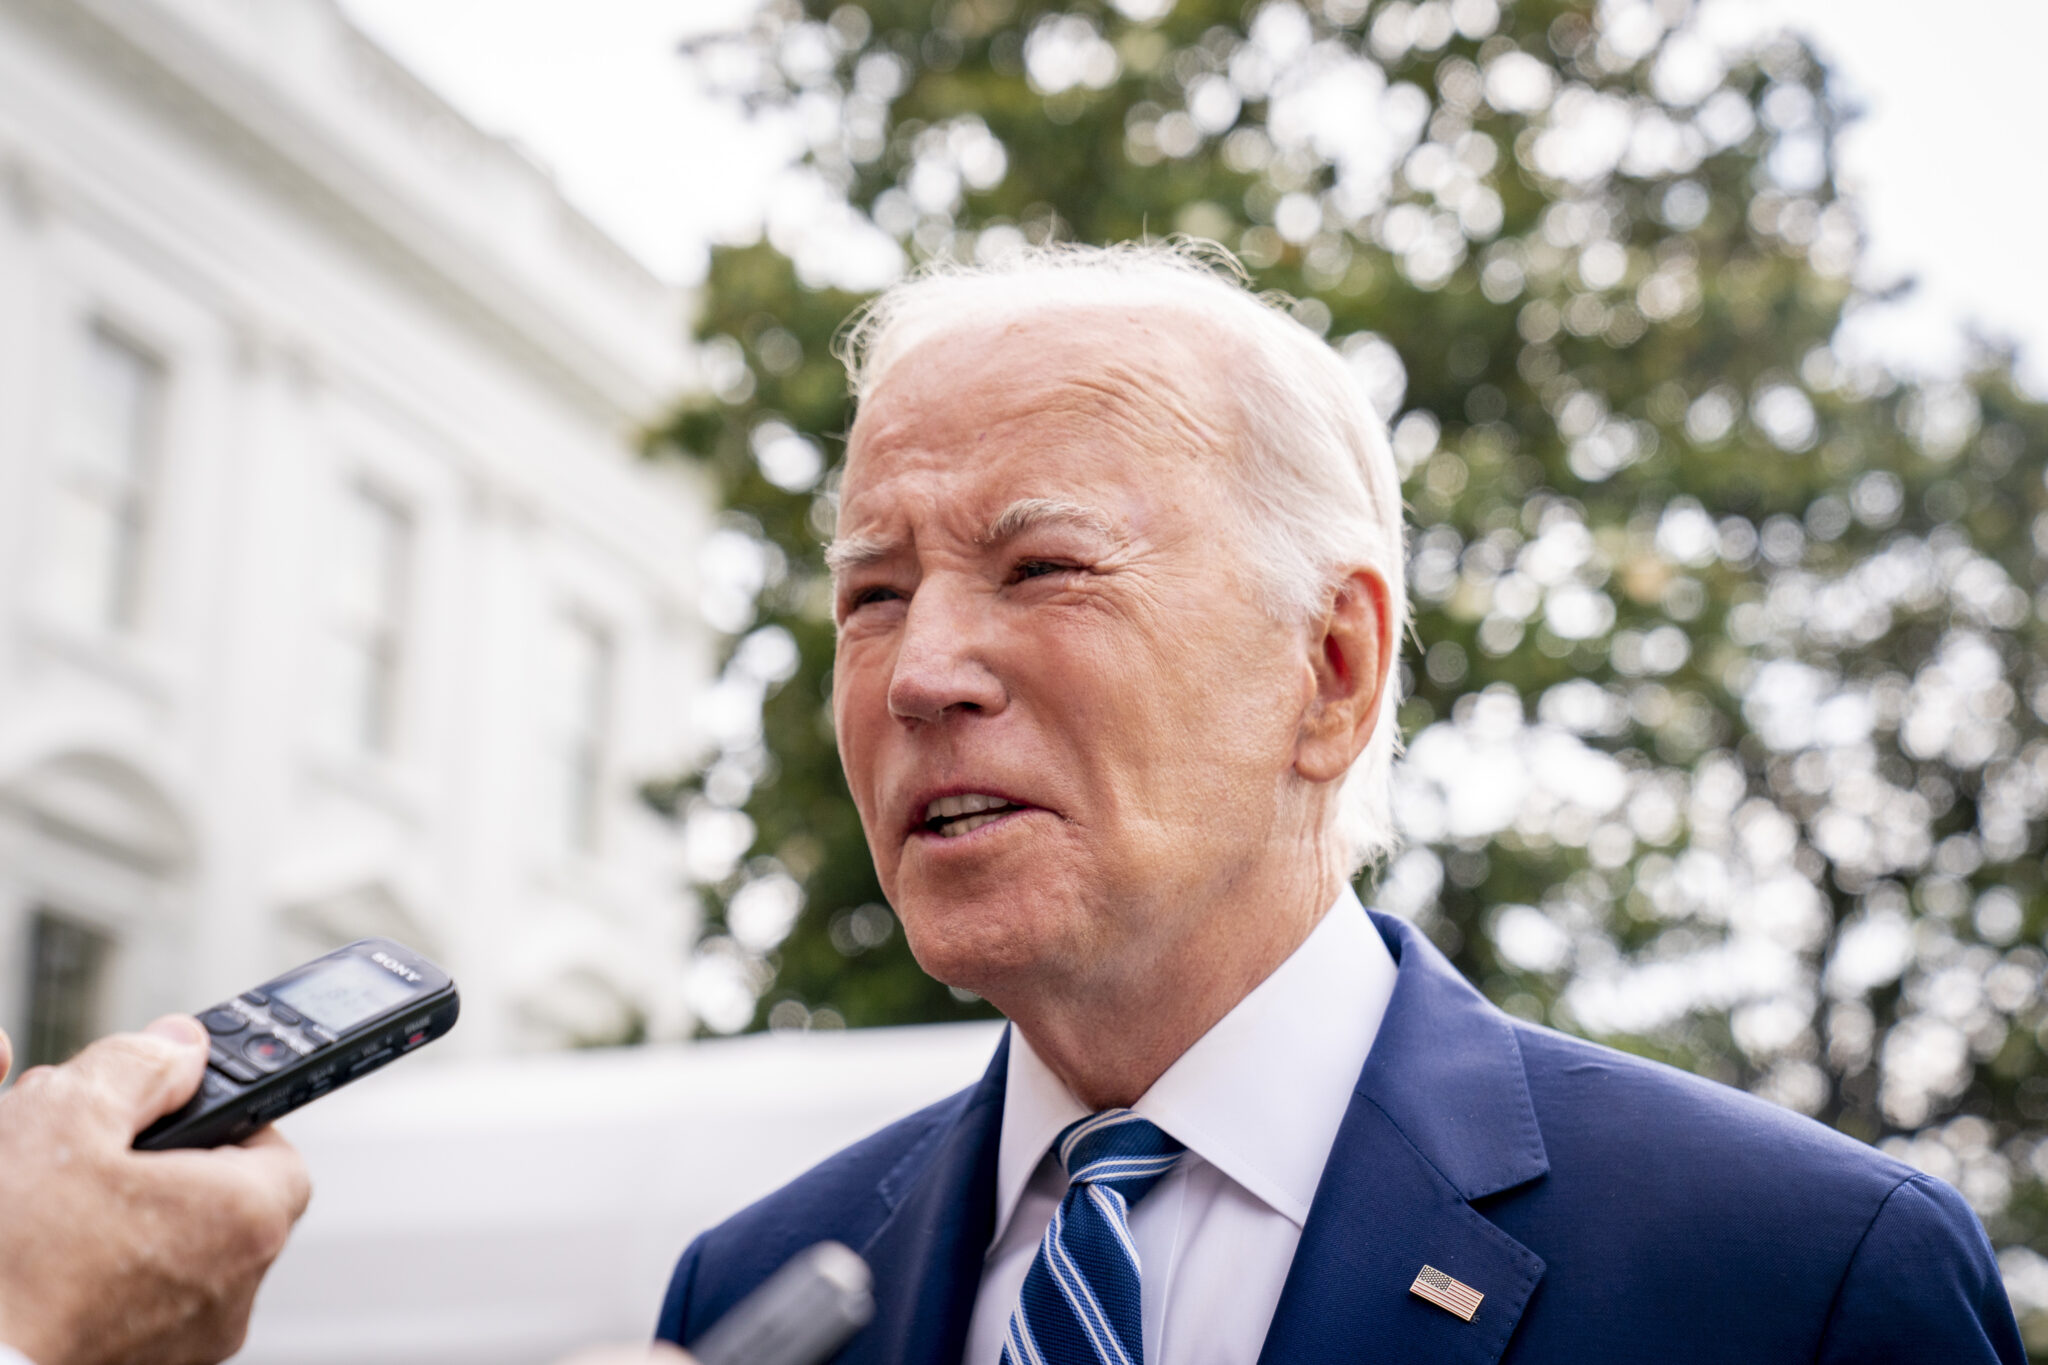 Axios Dishes on Biden Yelling at WH Aides and ‘Quick-Trigger Temper’ (mediaite.com)